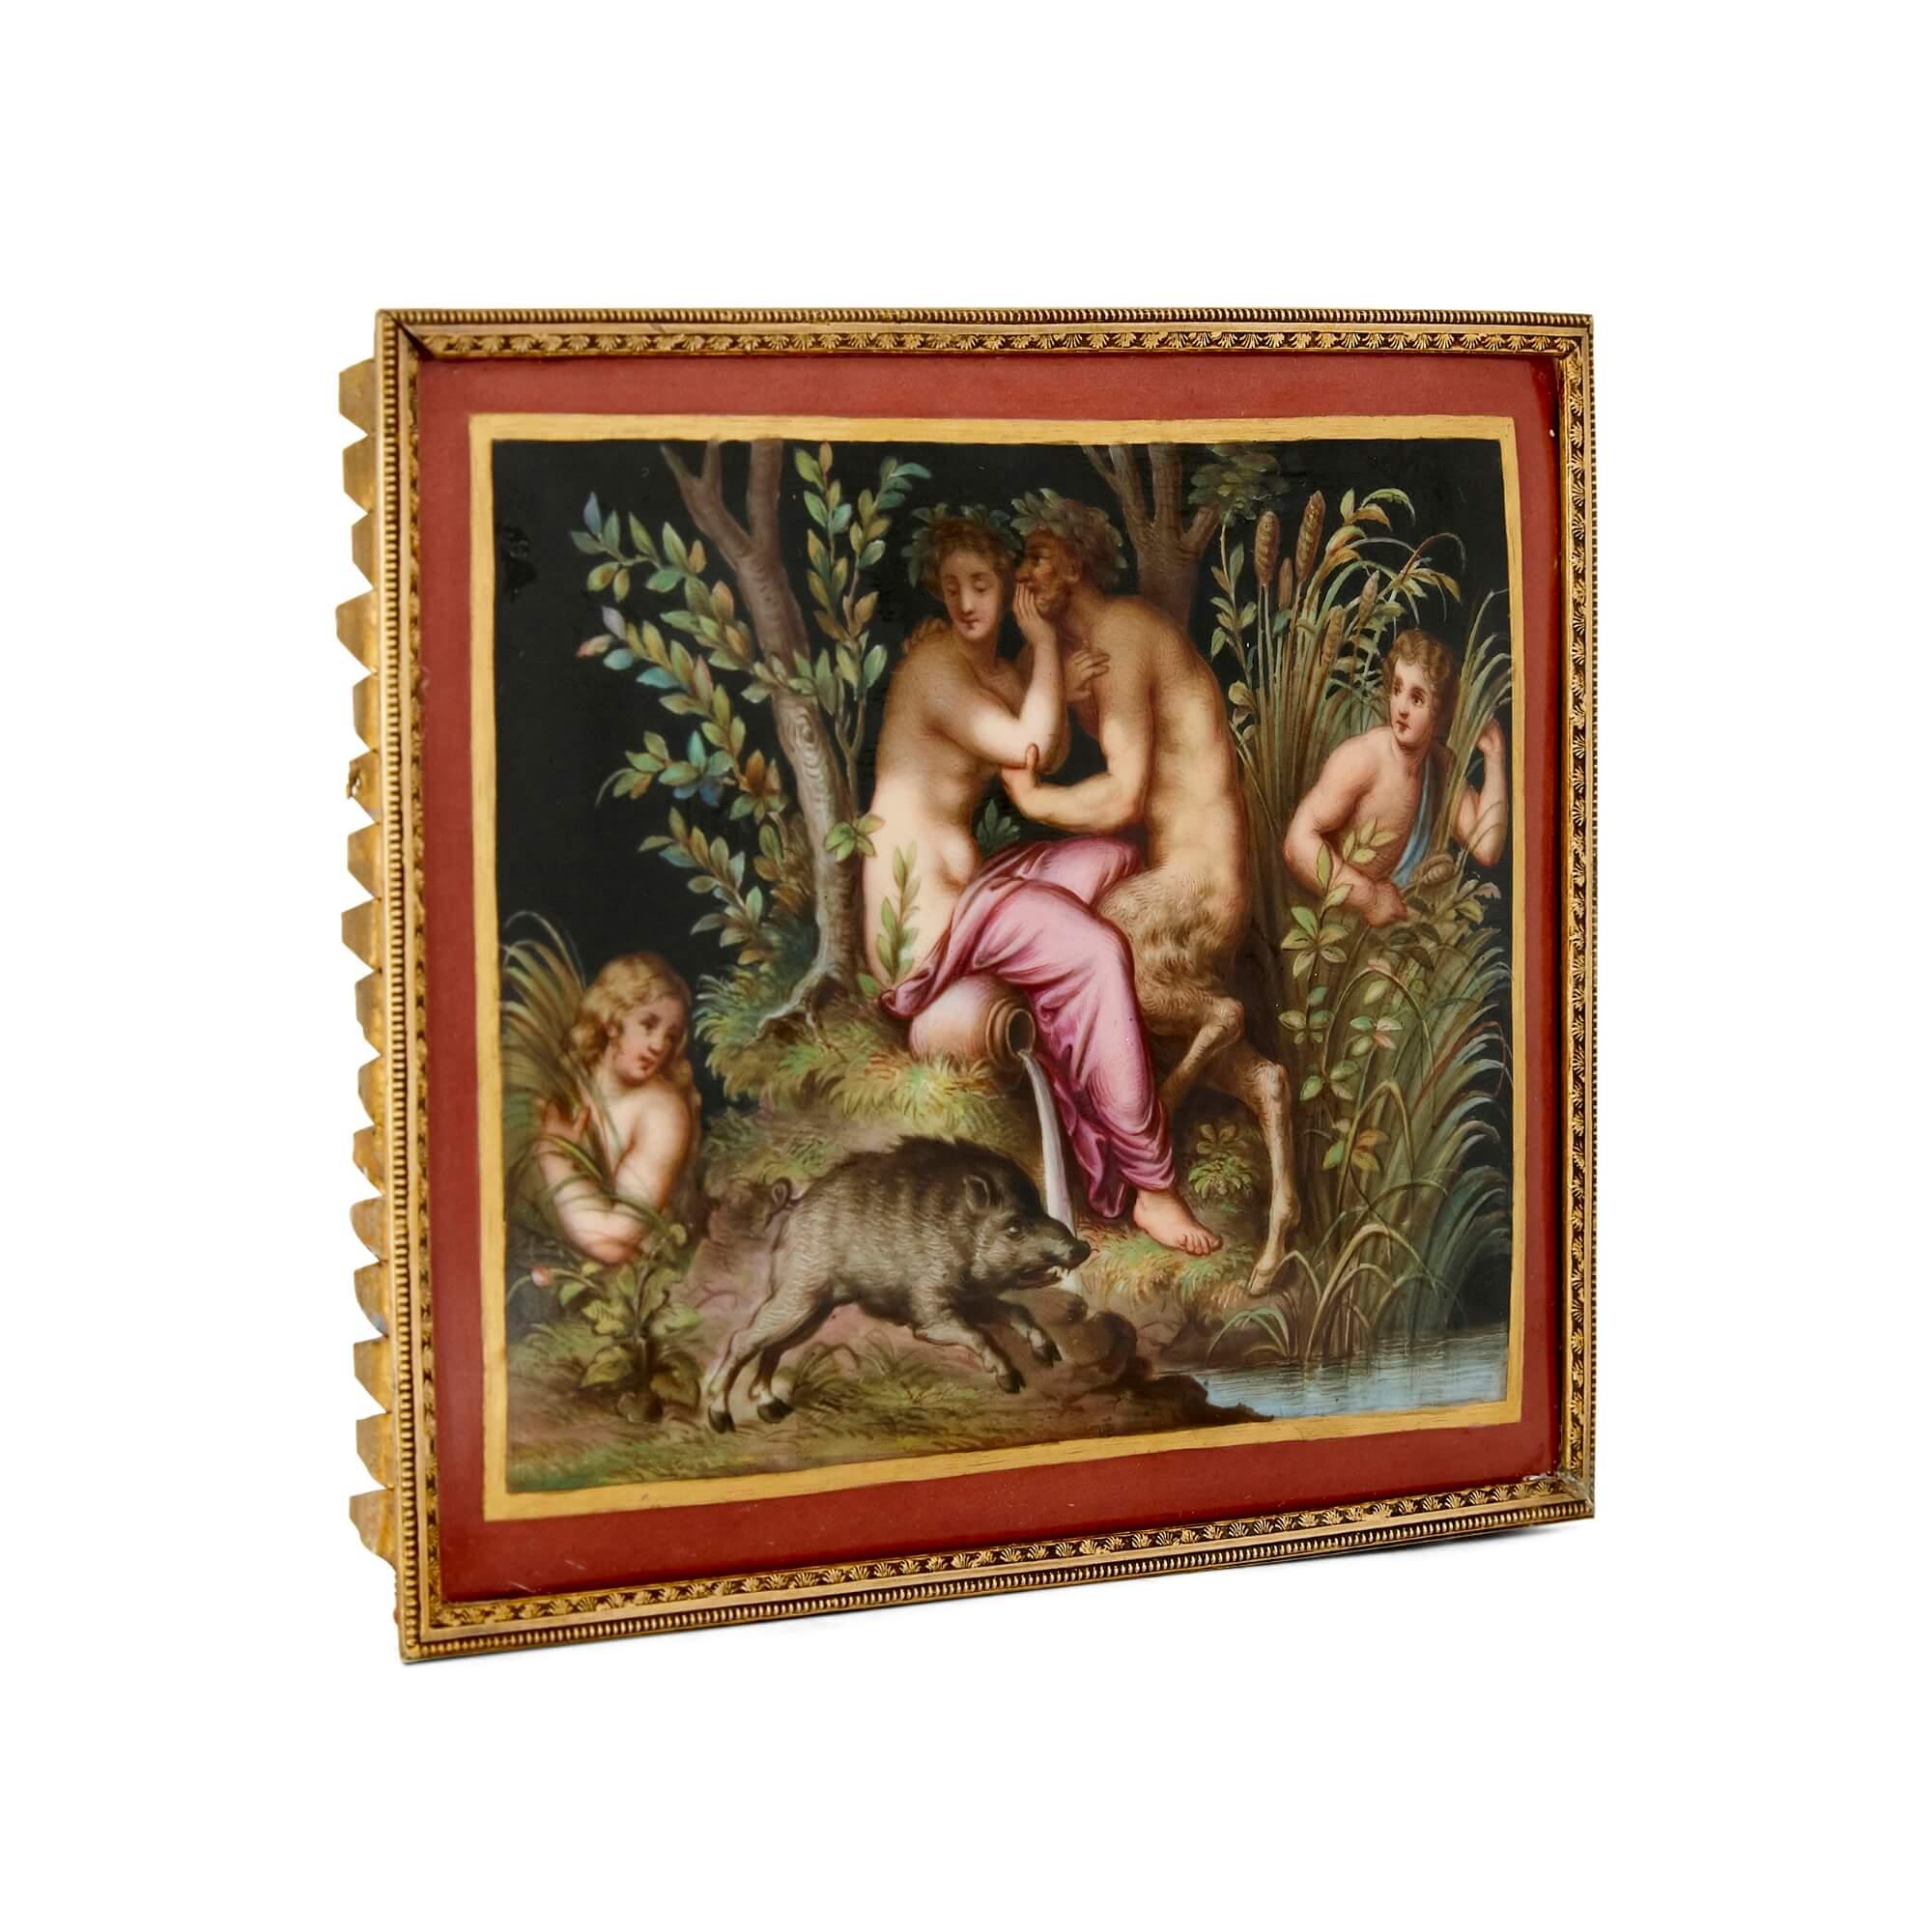 19th Century German Meissen painted porcelain plaque
German, 19th Century
Height 11cm, width 13.5cm, depth 1cm

This charming painted porcelain plaque depicts a nymph and a faun embracing in a setting by a lake. Surrounding them are foliage, two